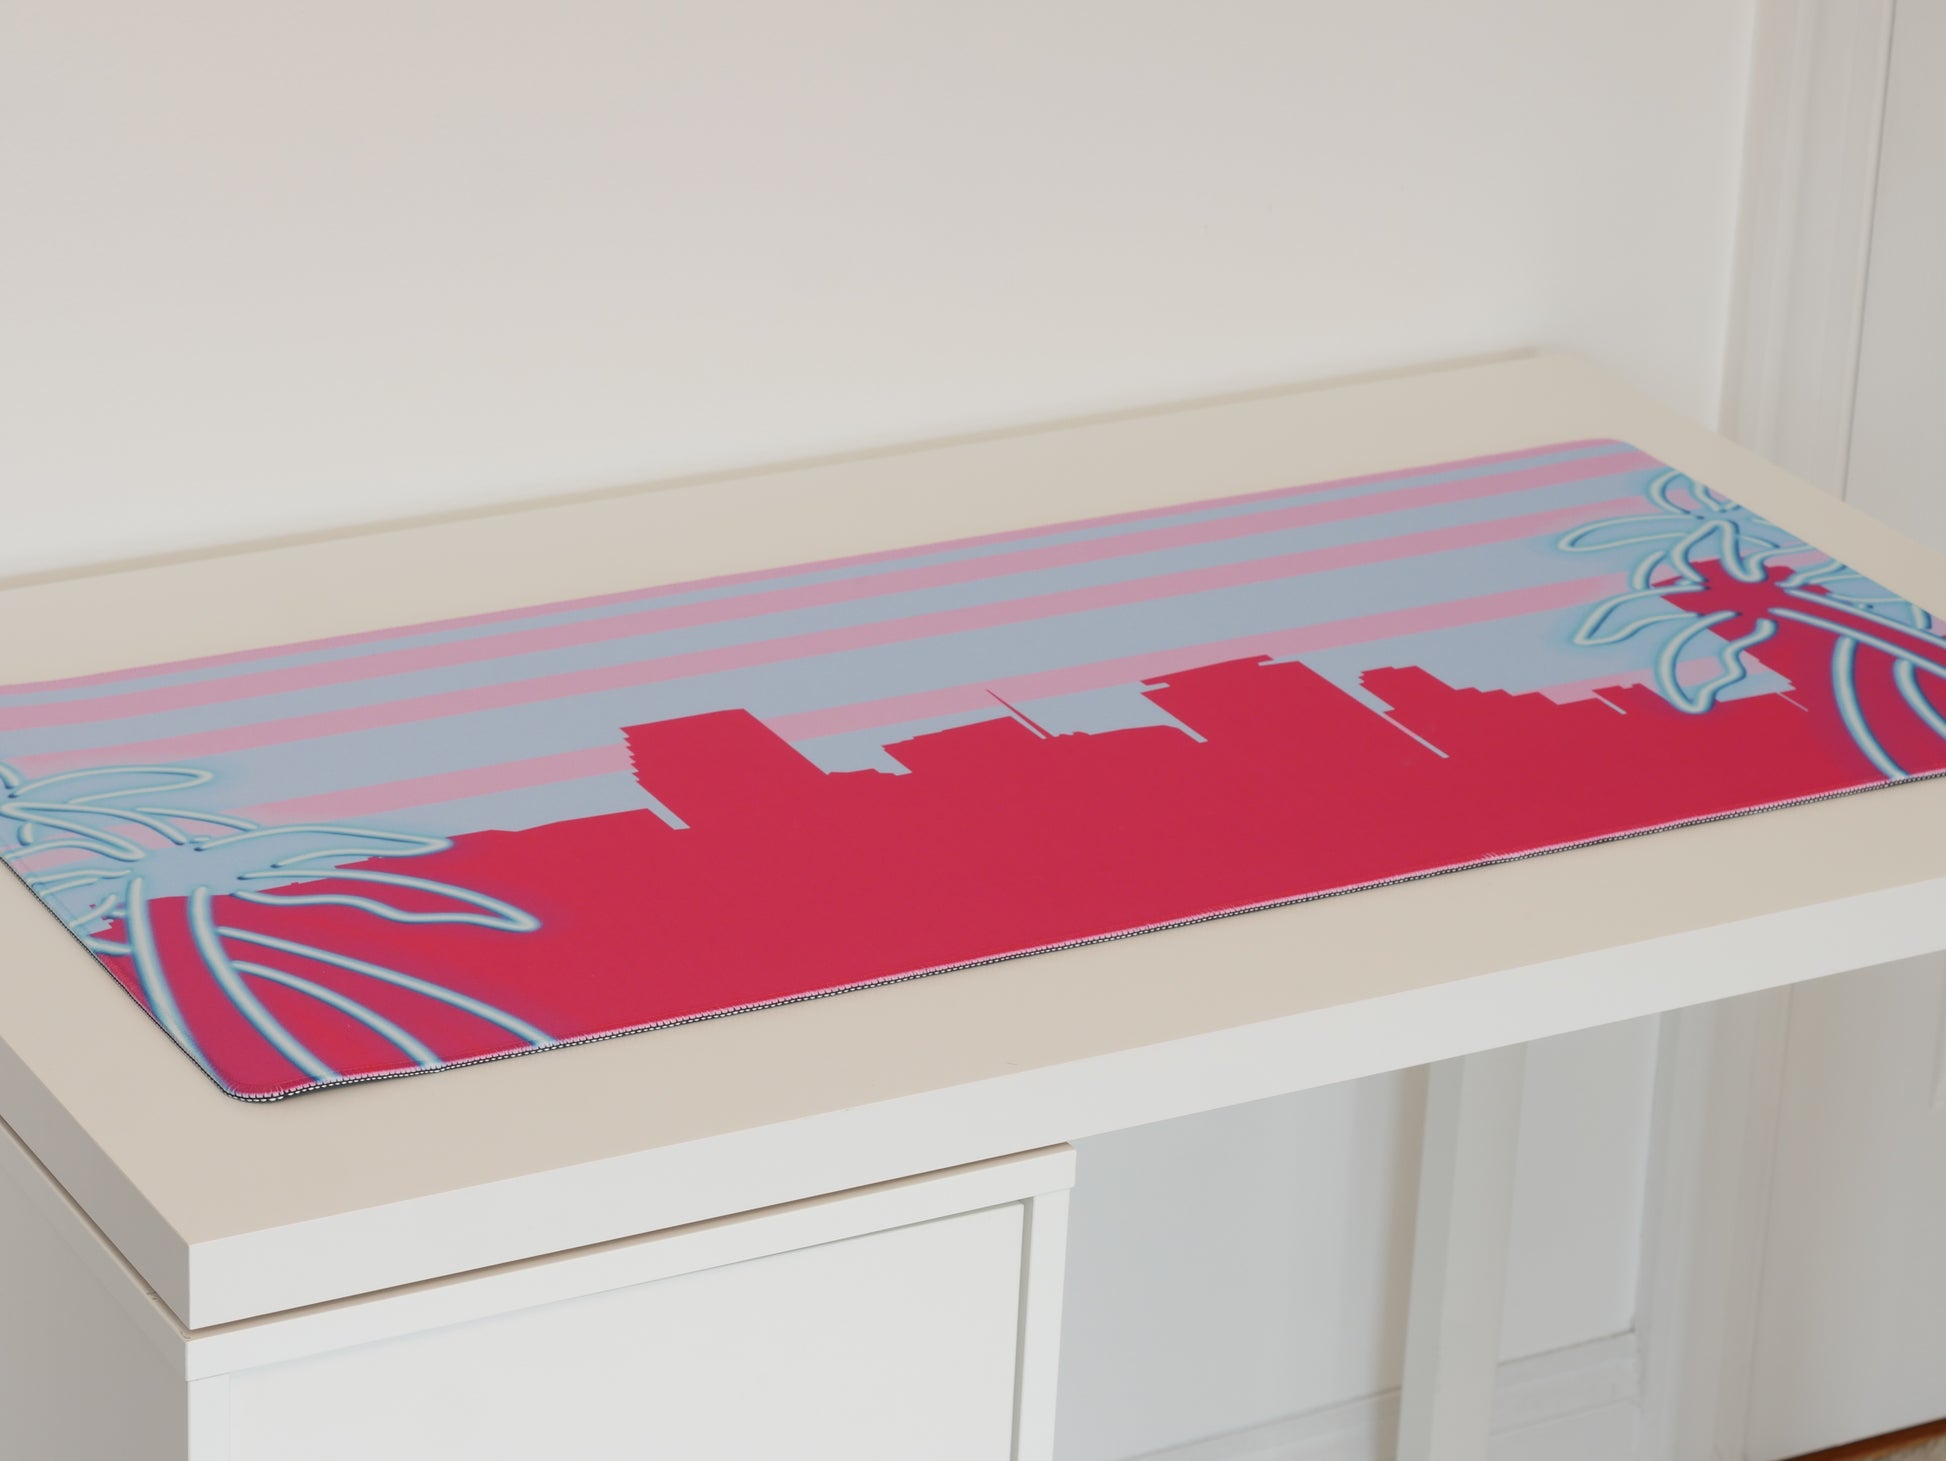 Desk mat with a pink and blue Miami skyline design sitting on a white desk.